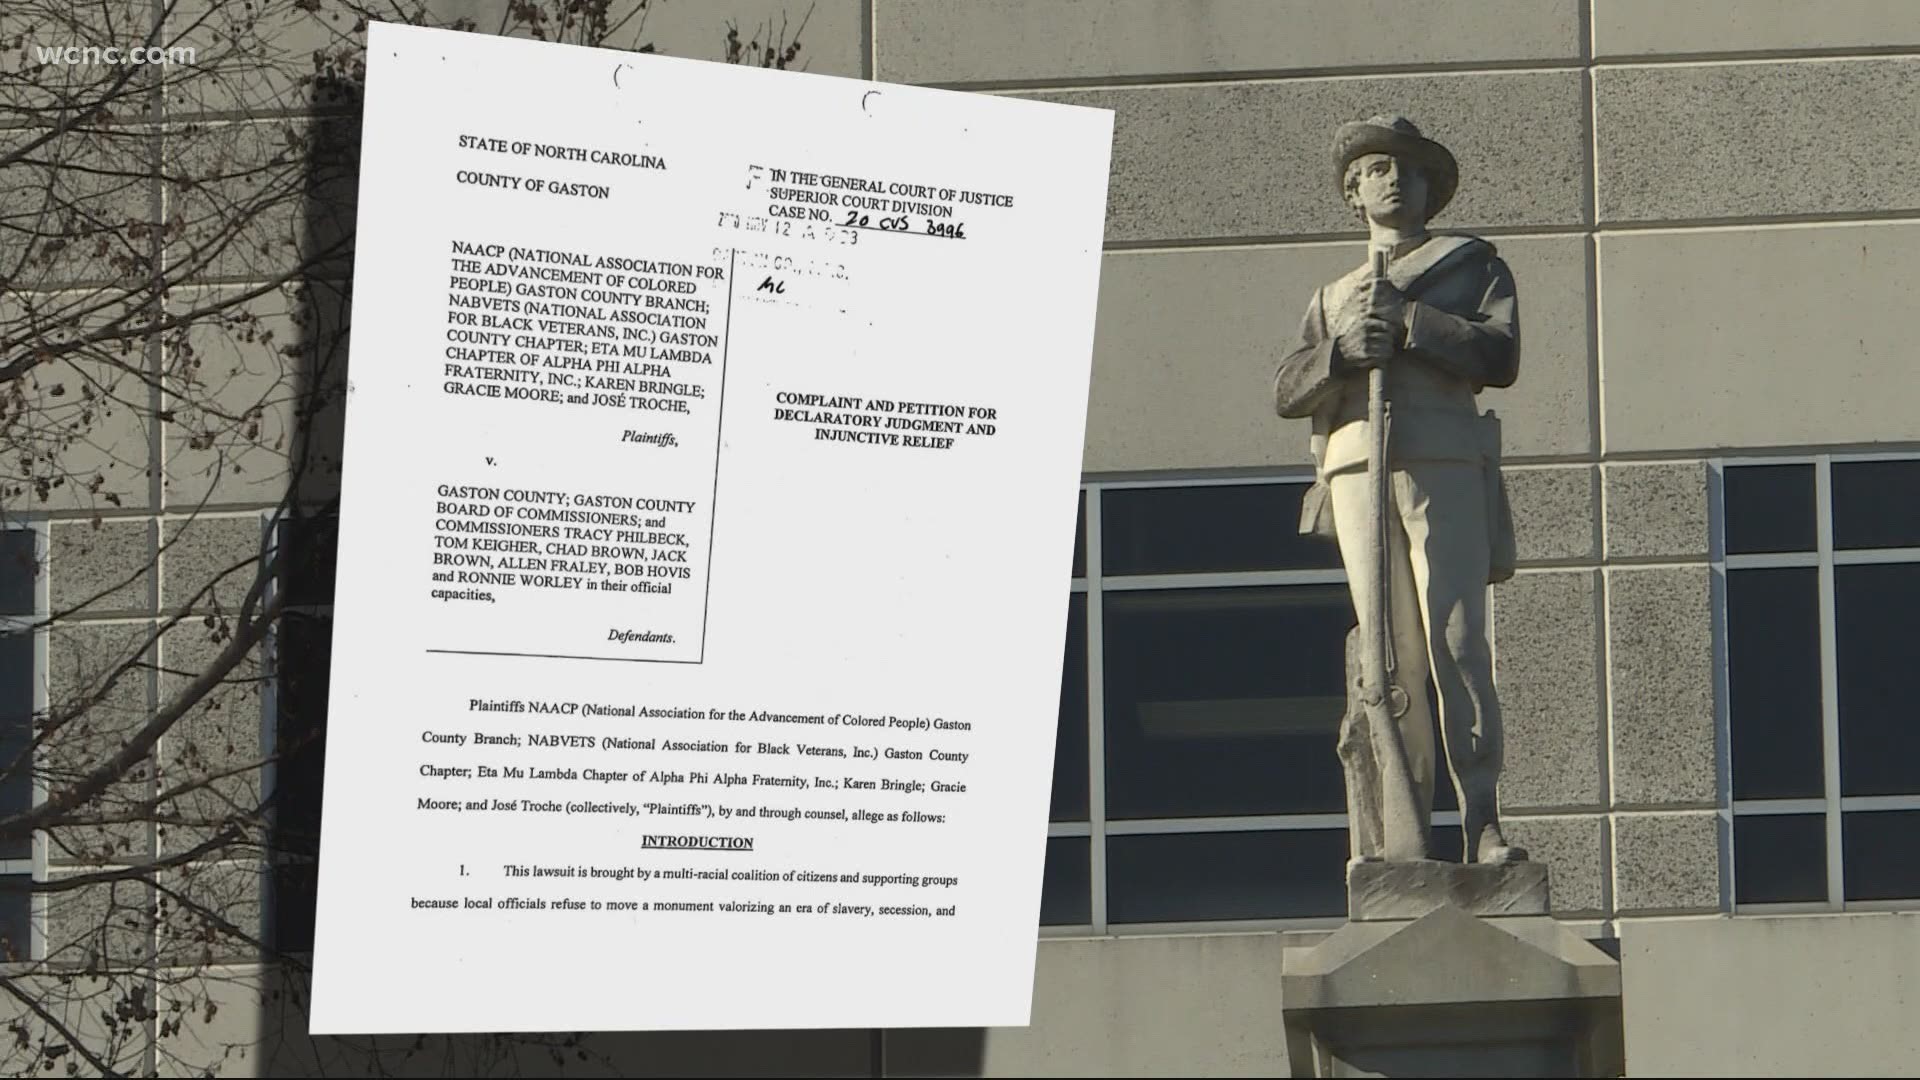 Several groups, including the NAACP's Gaston County branch, are suing county commissioners to remove the Confederate monument outside the courthouse.